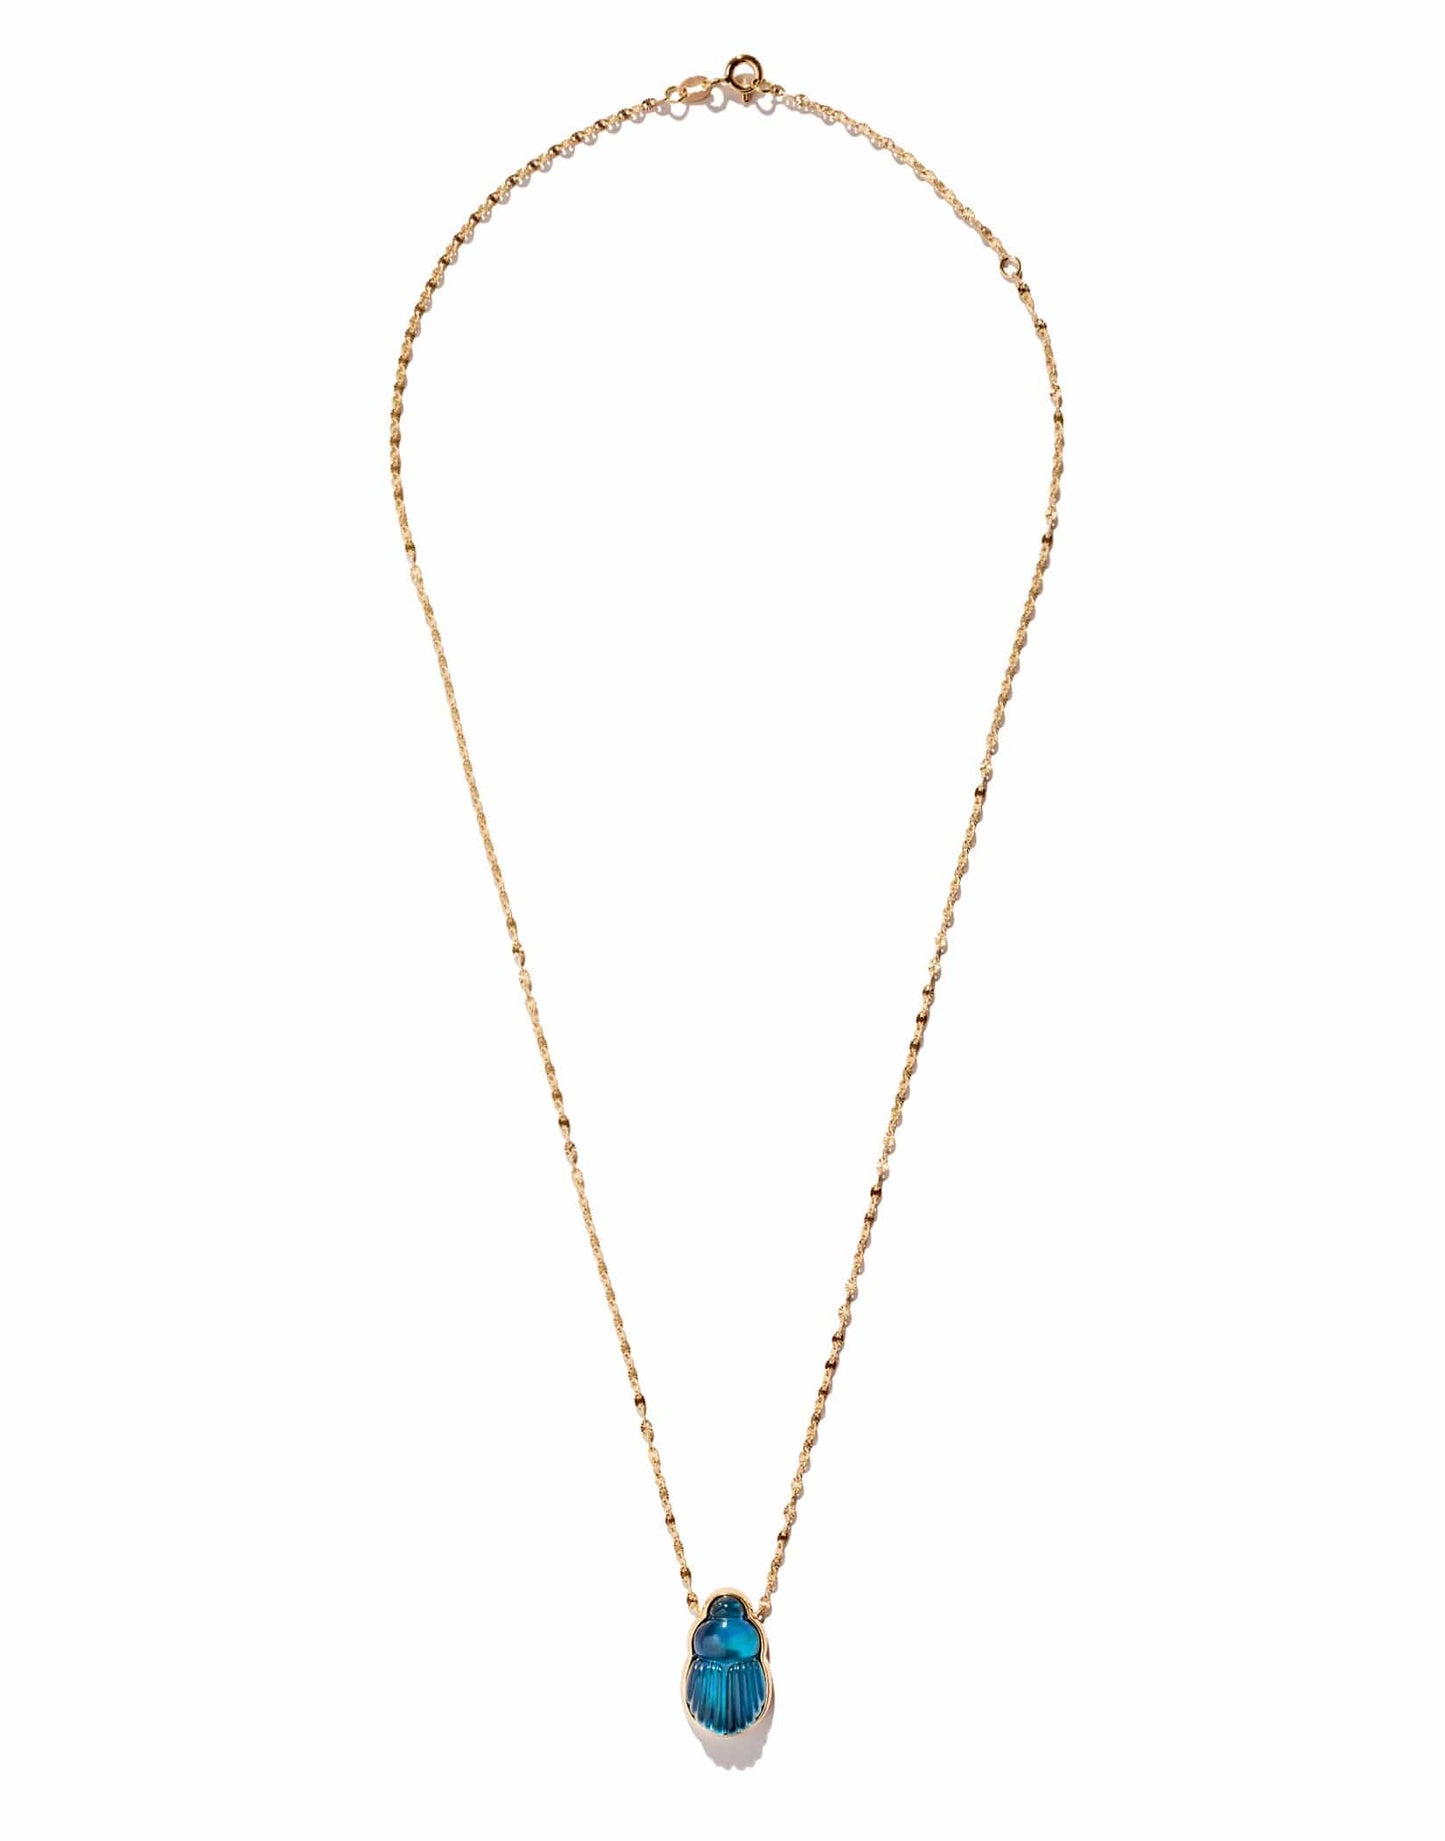 LITO-Small Sienna Blue Chalcedony Scarab Necklace-YELLOW GOLD